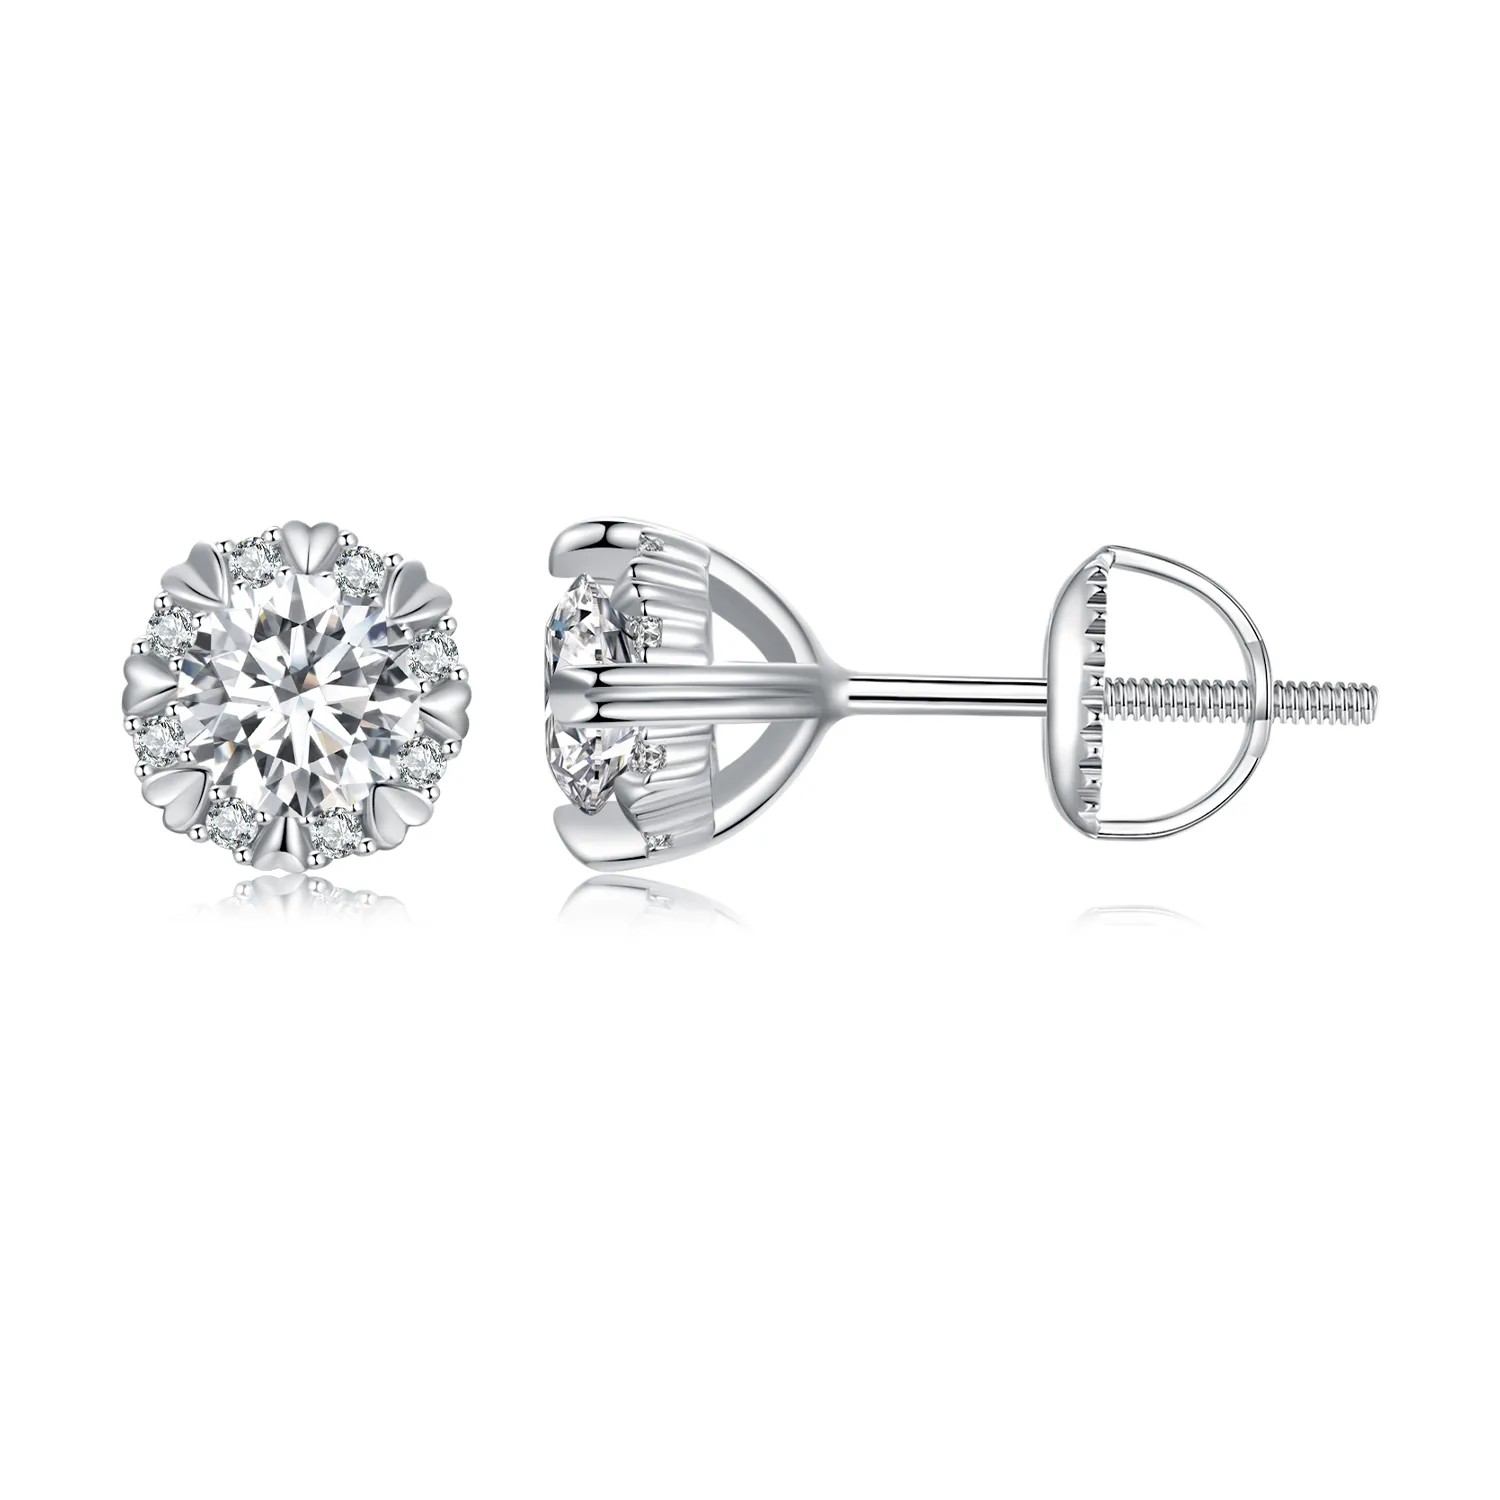 Pandora Style Exquisite Moissanite Studs Earrings(Two Certificates) - MSE017